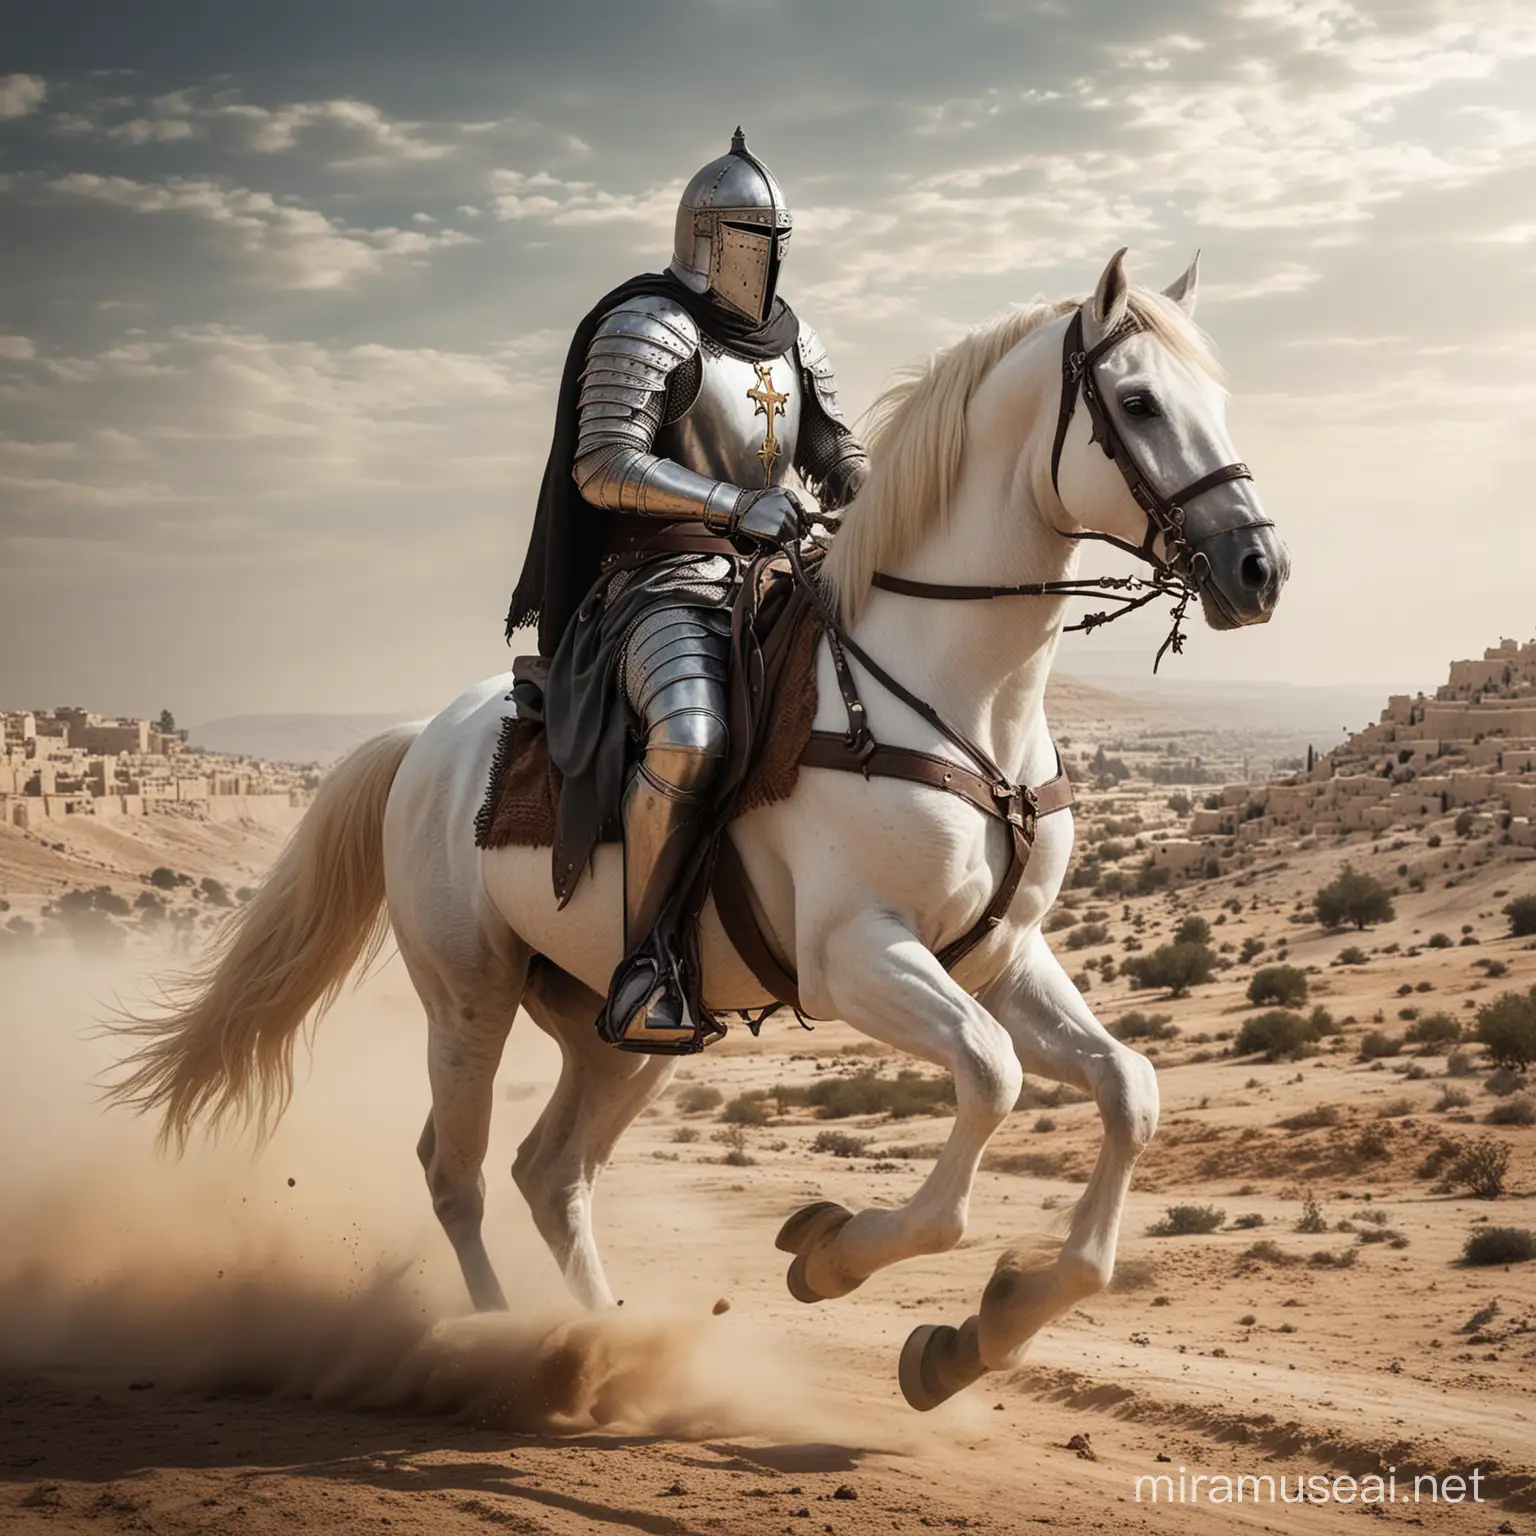 black cross crusader knight riding a white horse into battle. Out in a desert in Jerusalem 